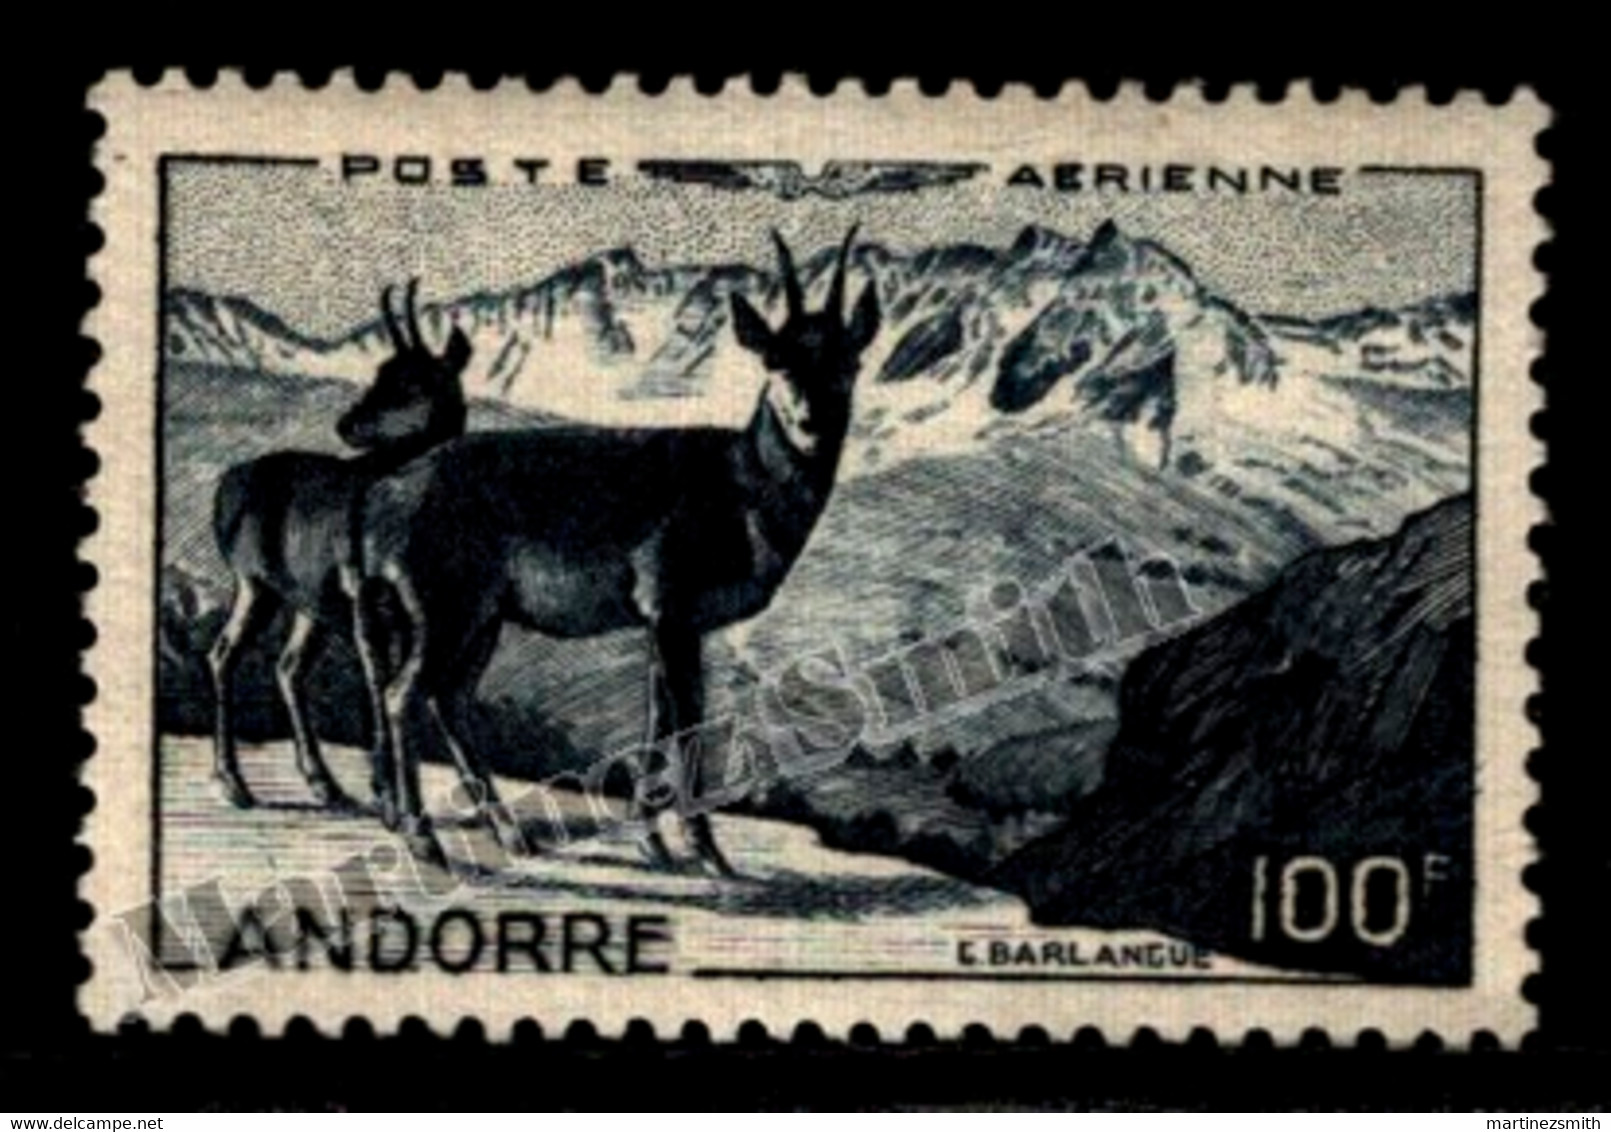 Andorre Français / French Andorra 1950 Airmail Yv. 1, Nature Landscape, Fauna, Isards - MNH - Luftpost